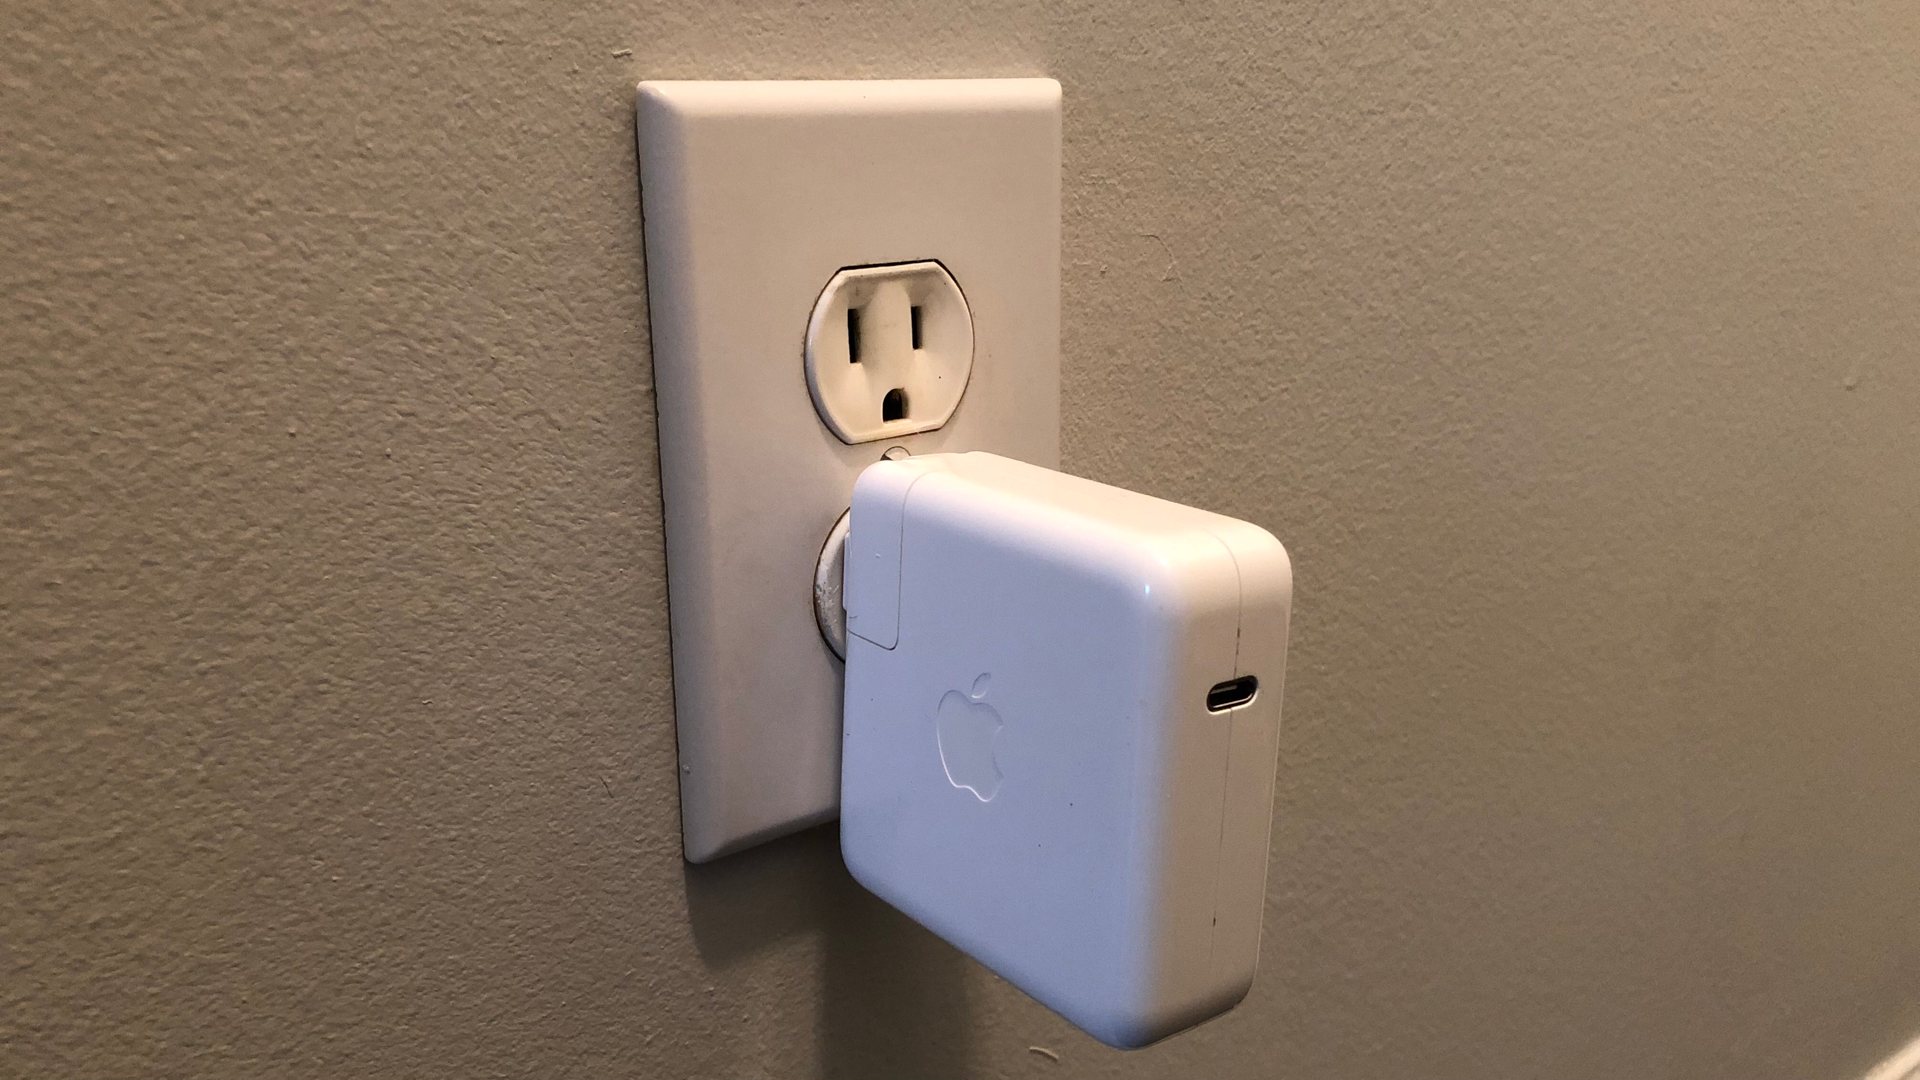 charge switch with apple charger